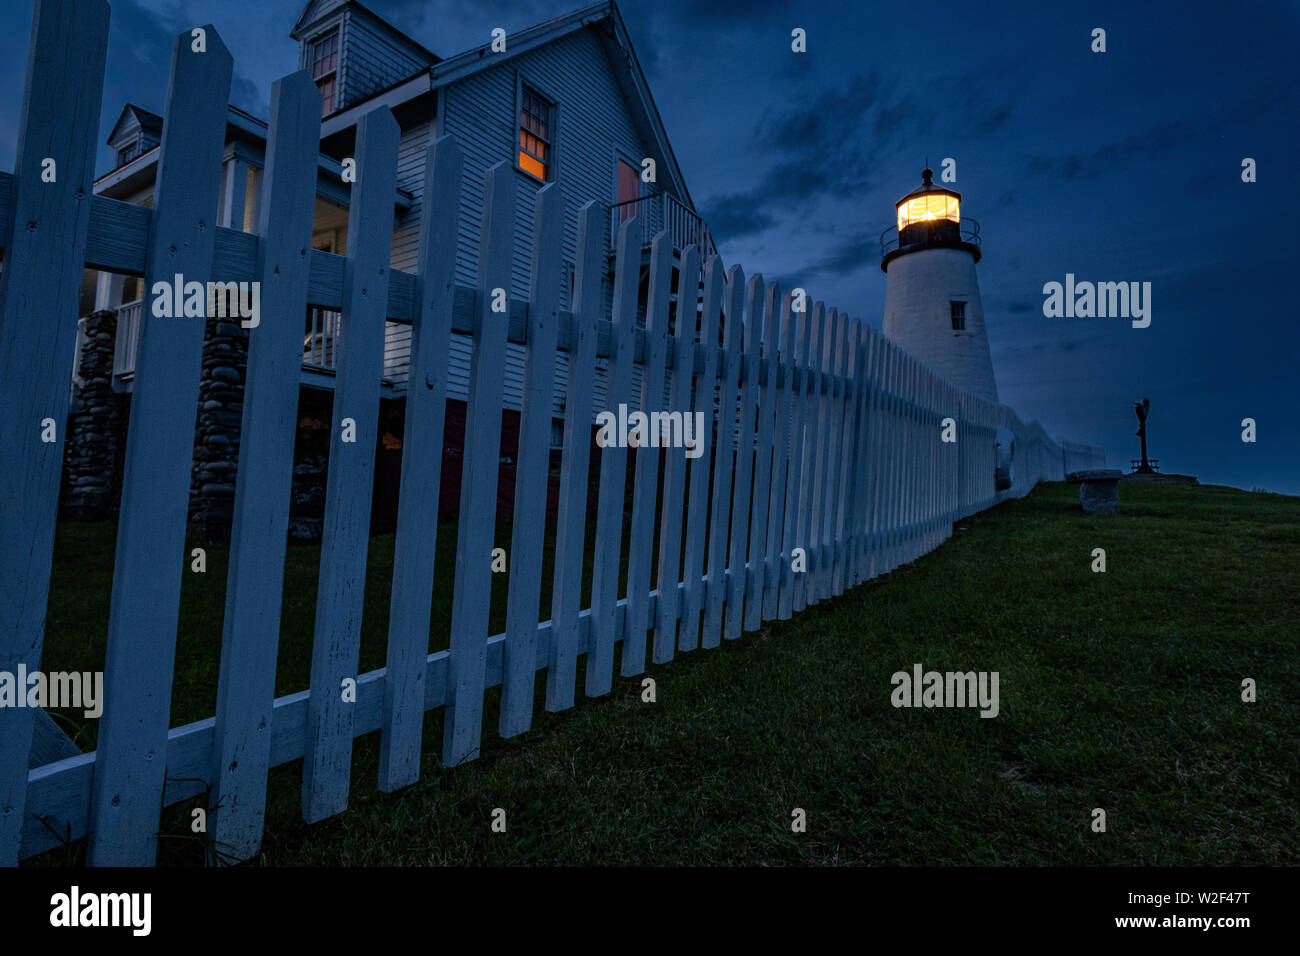 The historic Pemaquid Point Lighthouse, keepers cottage and white picket fence at twilight in Bristol, Maine. The picturesque lighthouse built along the rocky coast of Pemaquid Point was commissioned in 1827 by President John Quincy Adams. Stock Photo